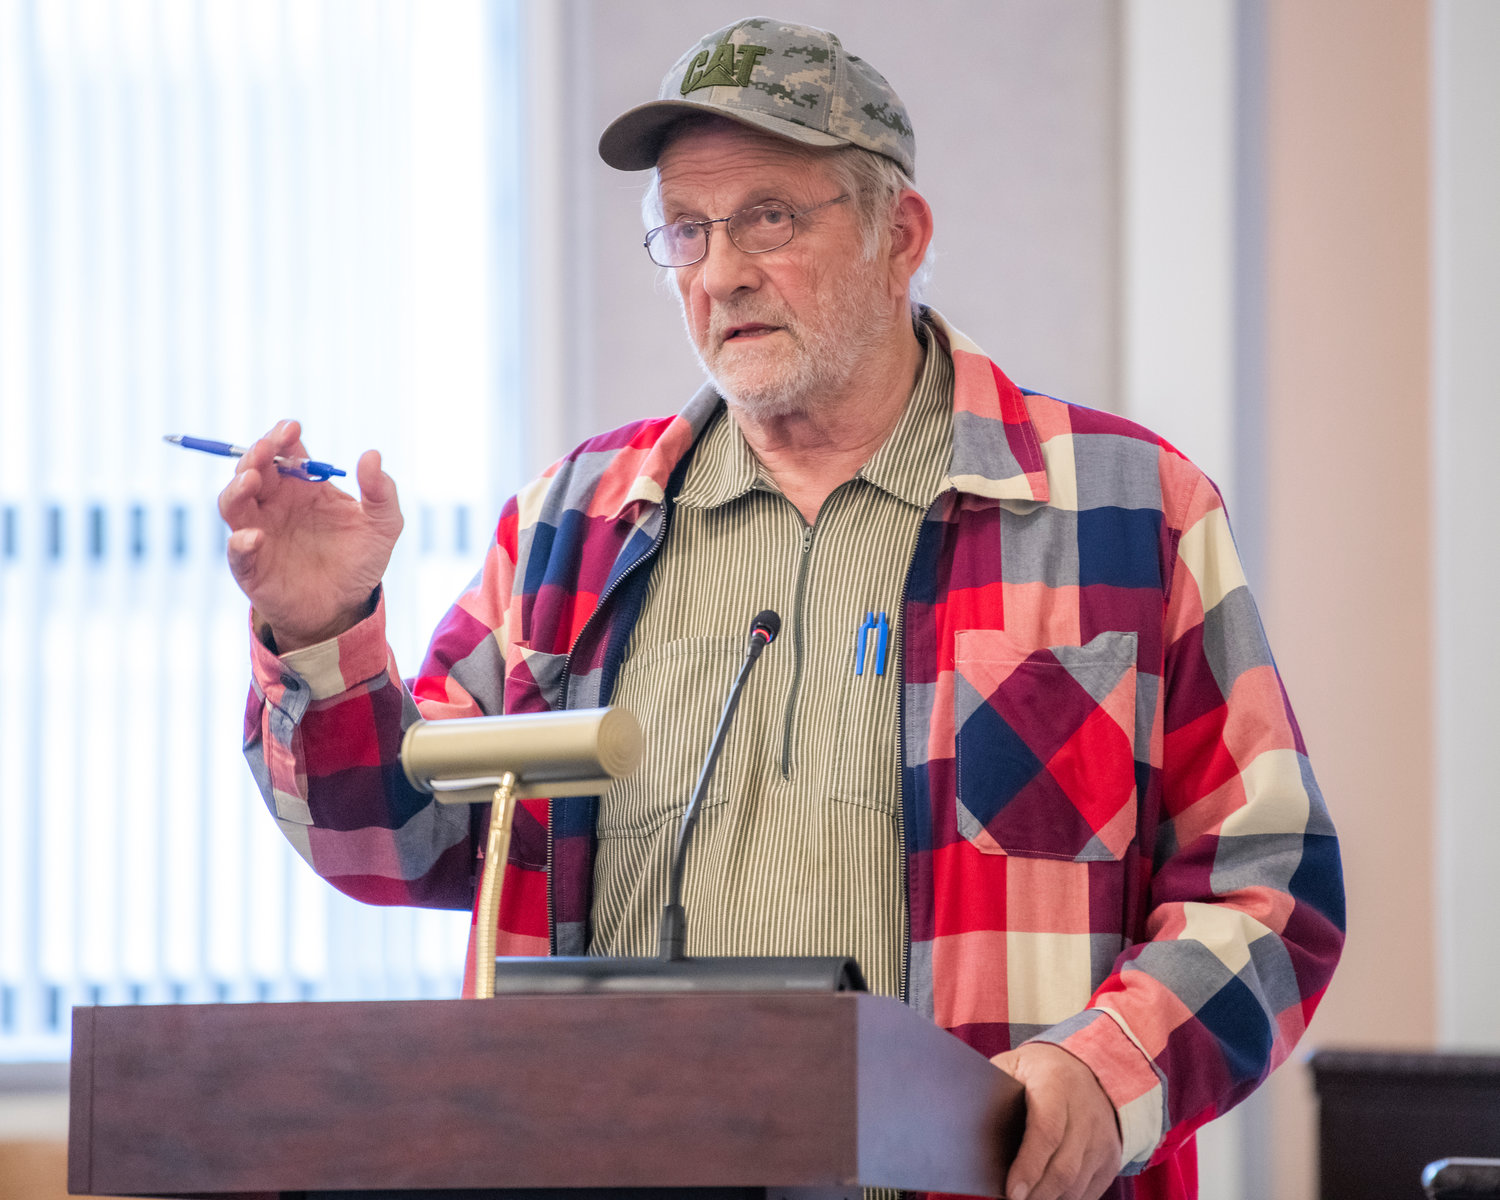 Mineral resident Ron Nilson speaks in opposition of a rezone on YMCA property north of Mineral Lake during public comment at a Lewis County Planning Commission meeting Tuesday night.